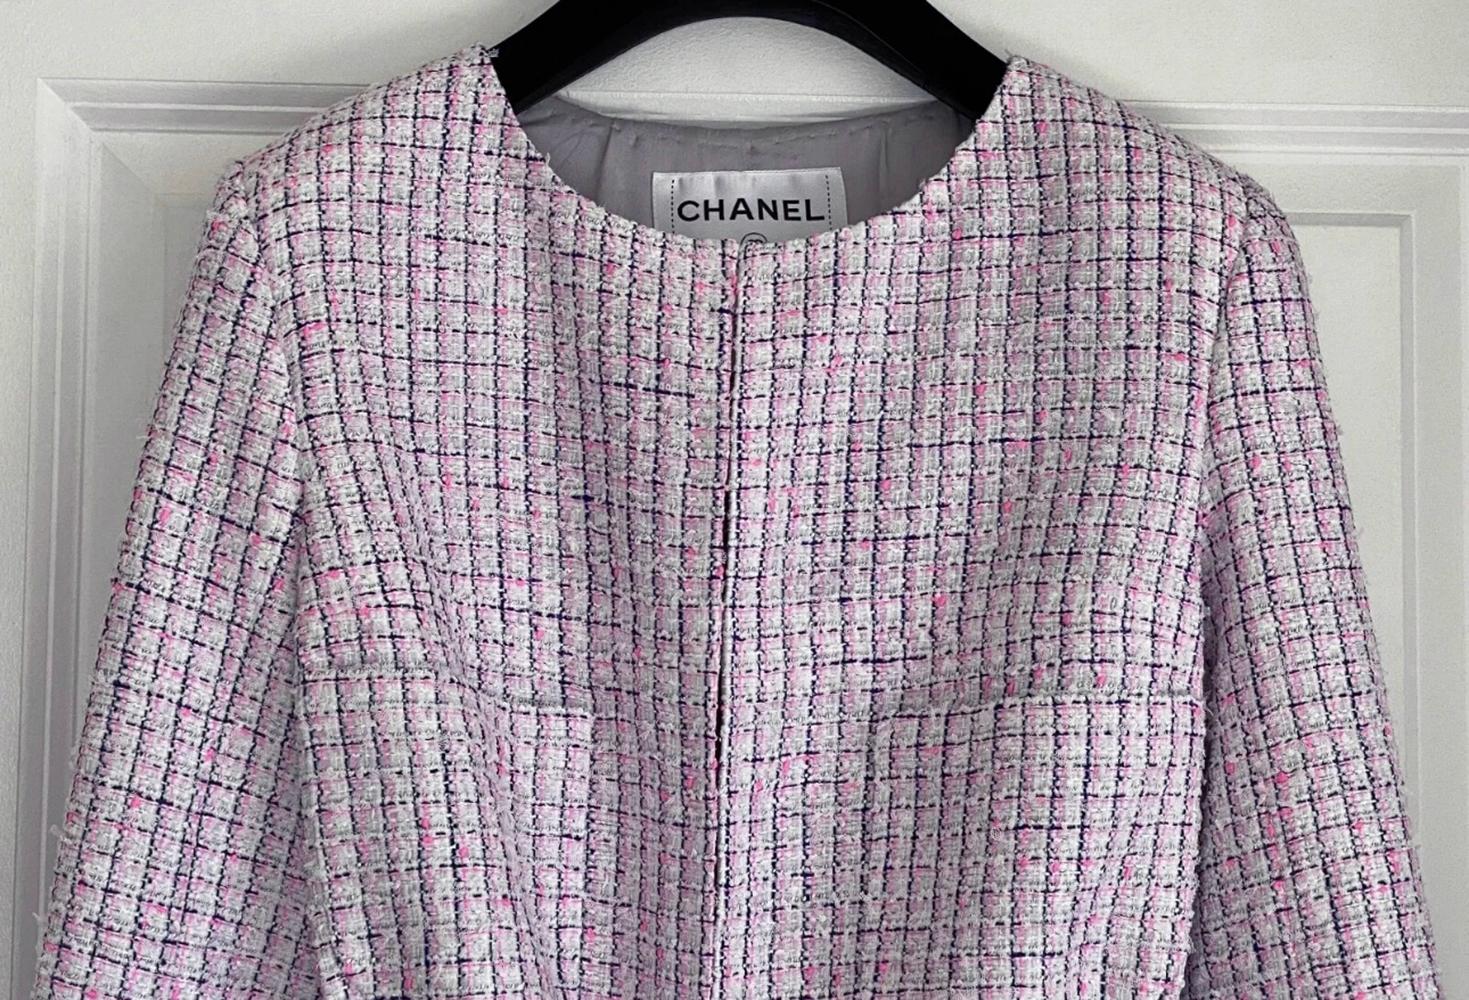 Chanel Lesage Tweed Jacket in Lilac For Sale 5